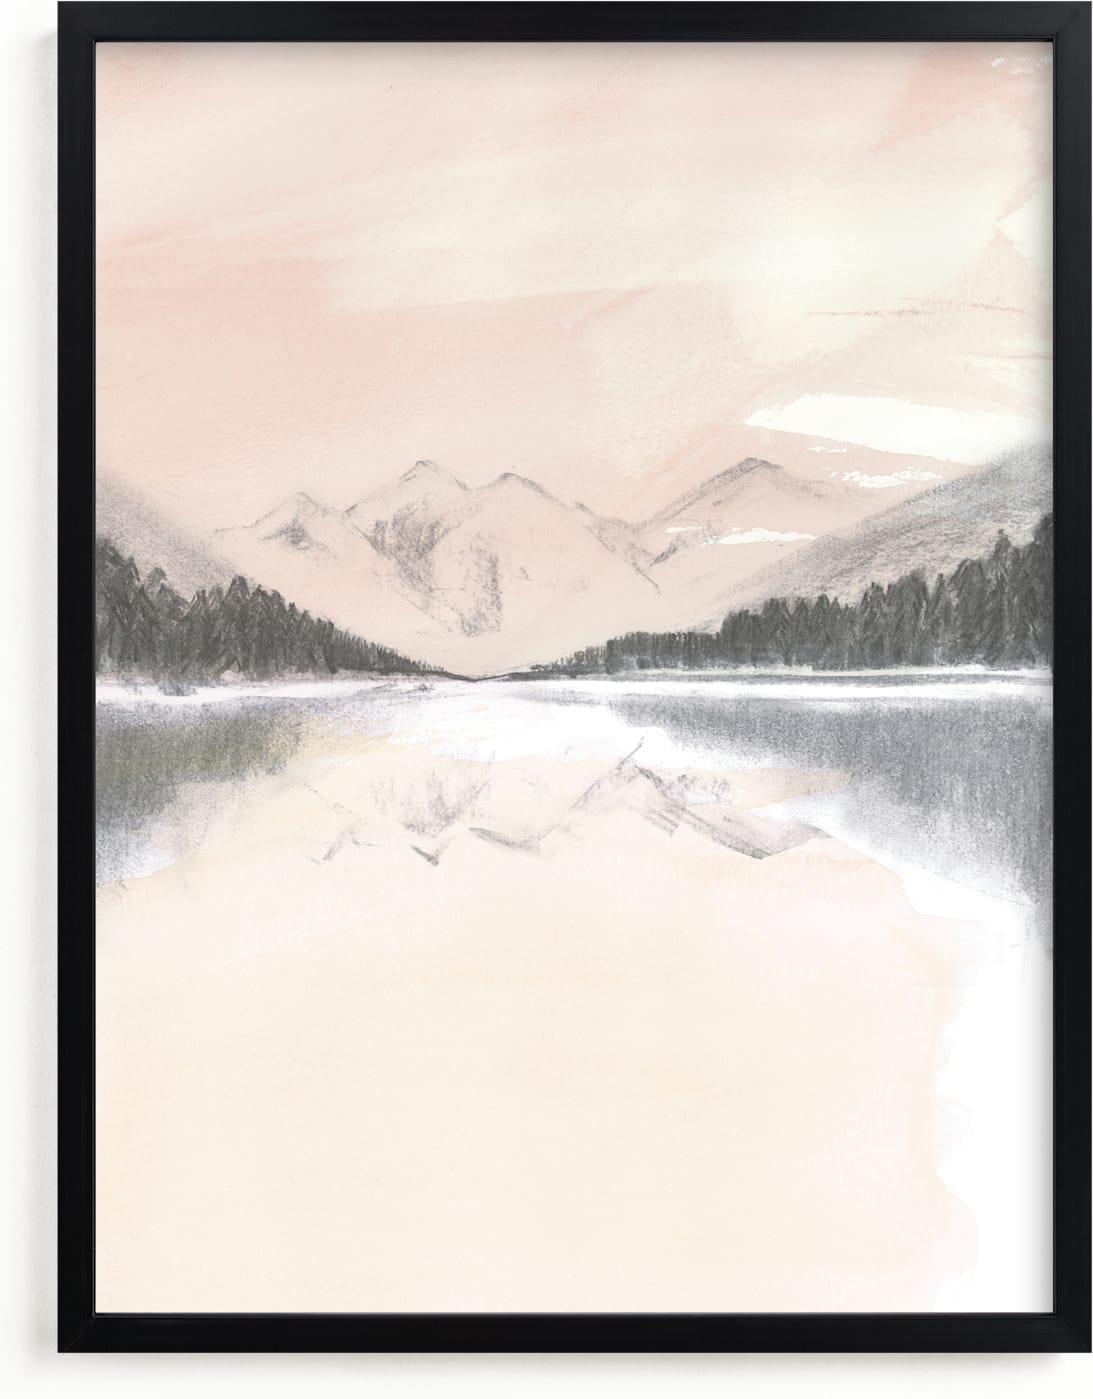 This is a black and white, pink, rosegold art by Teju Reval called Dreamy Lake.